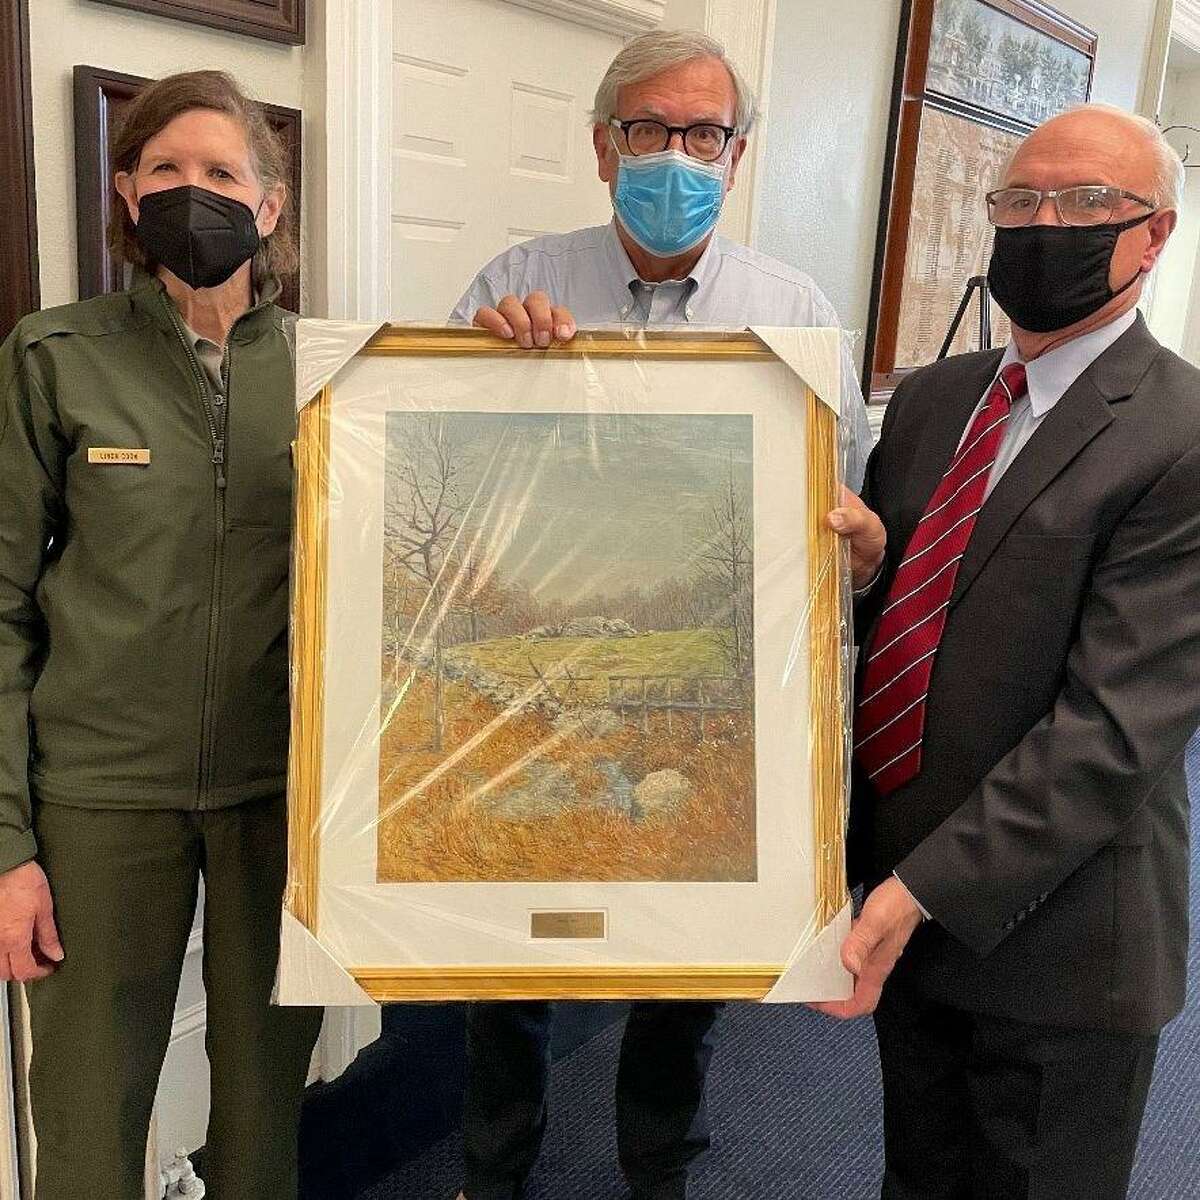 Weir Farm National Historic Park Superintendent Linda Cook and Weir Farm Art Alliance President Bob Trainer present First Selectman Rudy Marconi with a reproduction of Julian Alden Weir’s painting “Autumn” to hang in Town Hall.